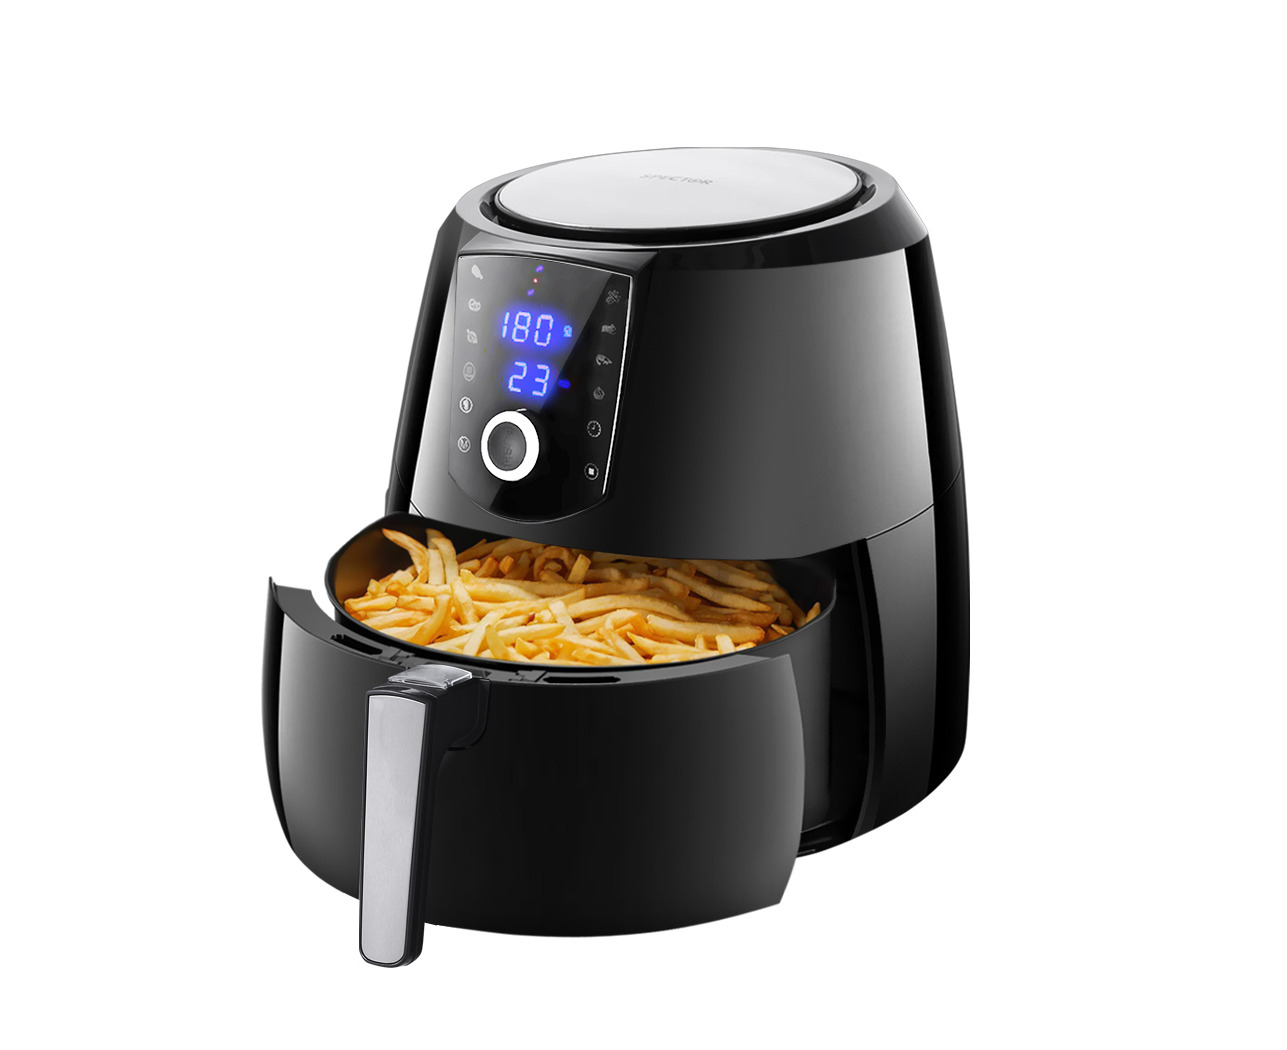 1800W Fast Cook 6QT Air fryer Oven Large Digital Oilless Cooker w/Quick Knob & Touch Screen w/Cookbook Nonstick Basket OMORC Air Fryer XL 6QT Preheat& Time display 8-15 Presets 2-Year Warranty 